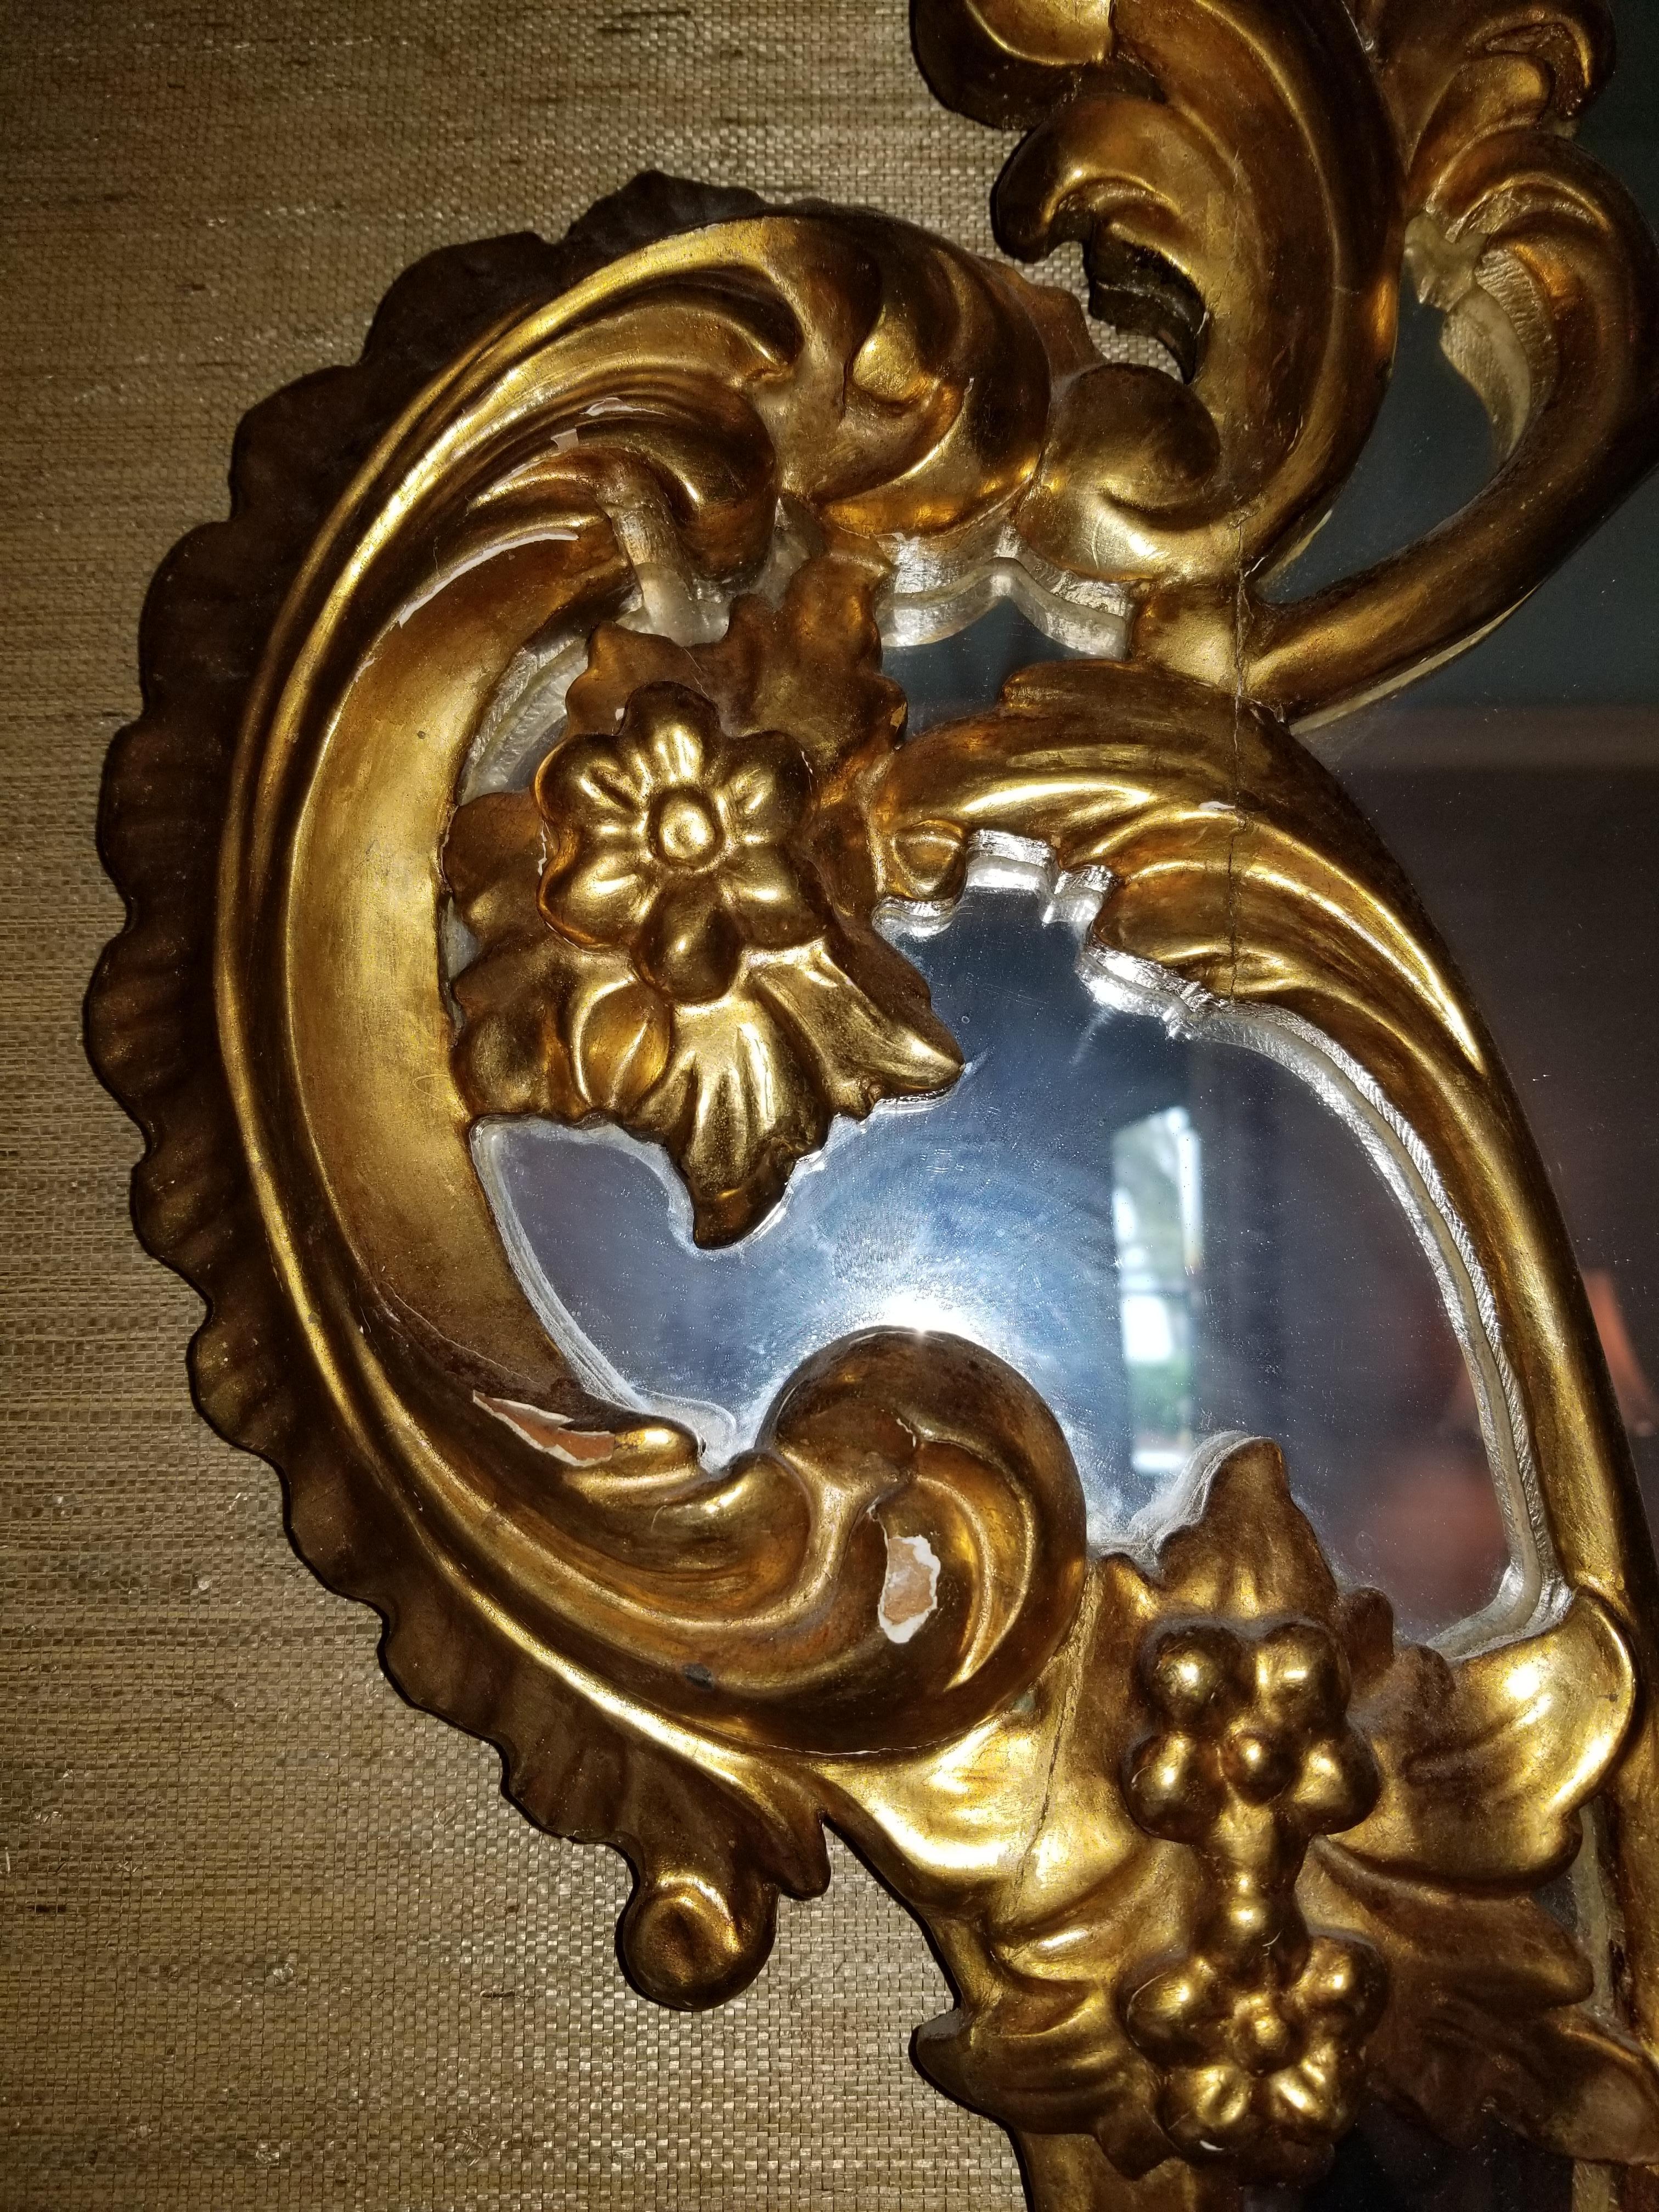 20th century pair of giltwood mirrors with a shell motif at top.
           